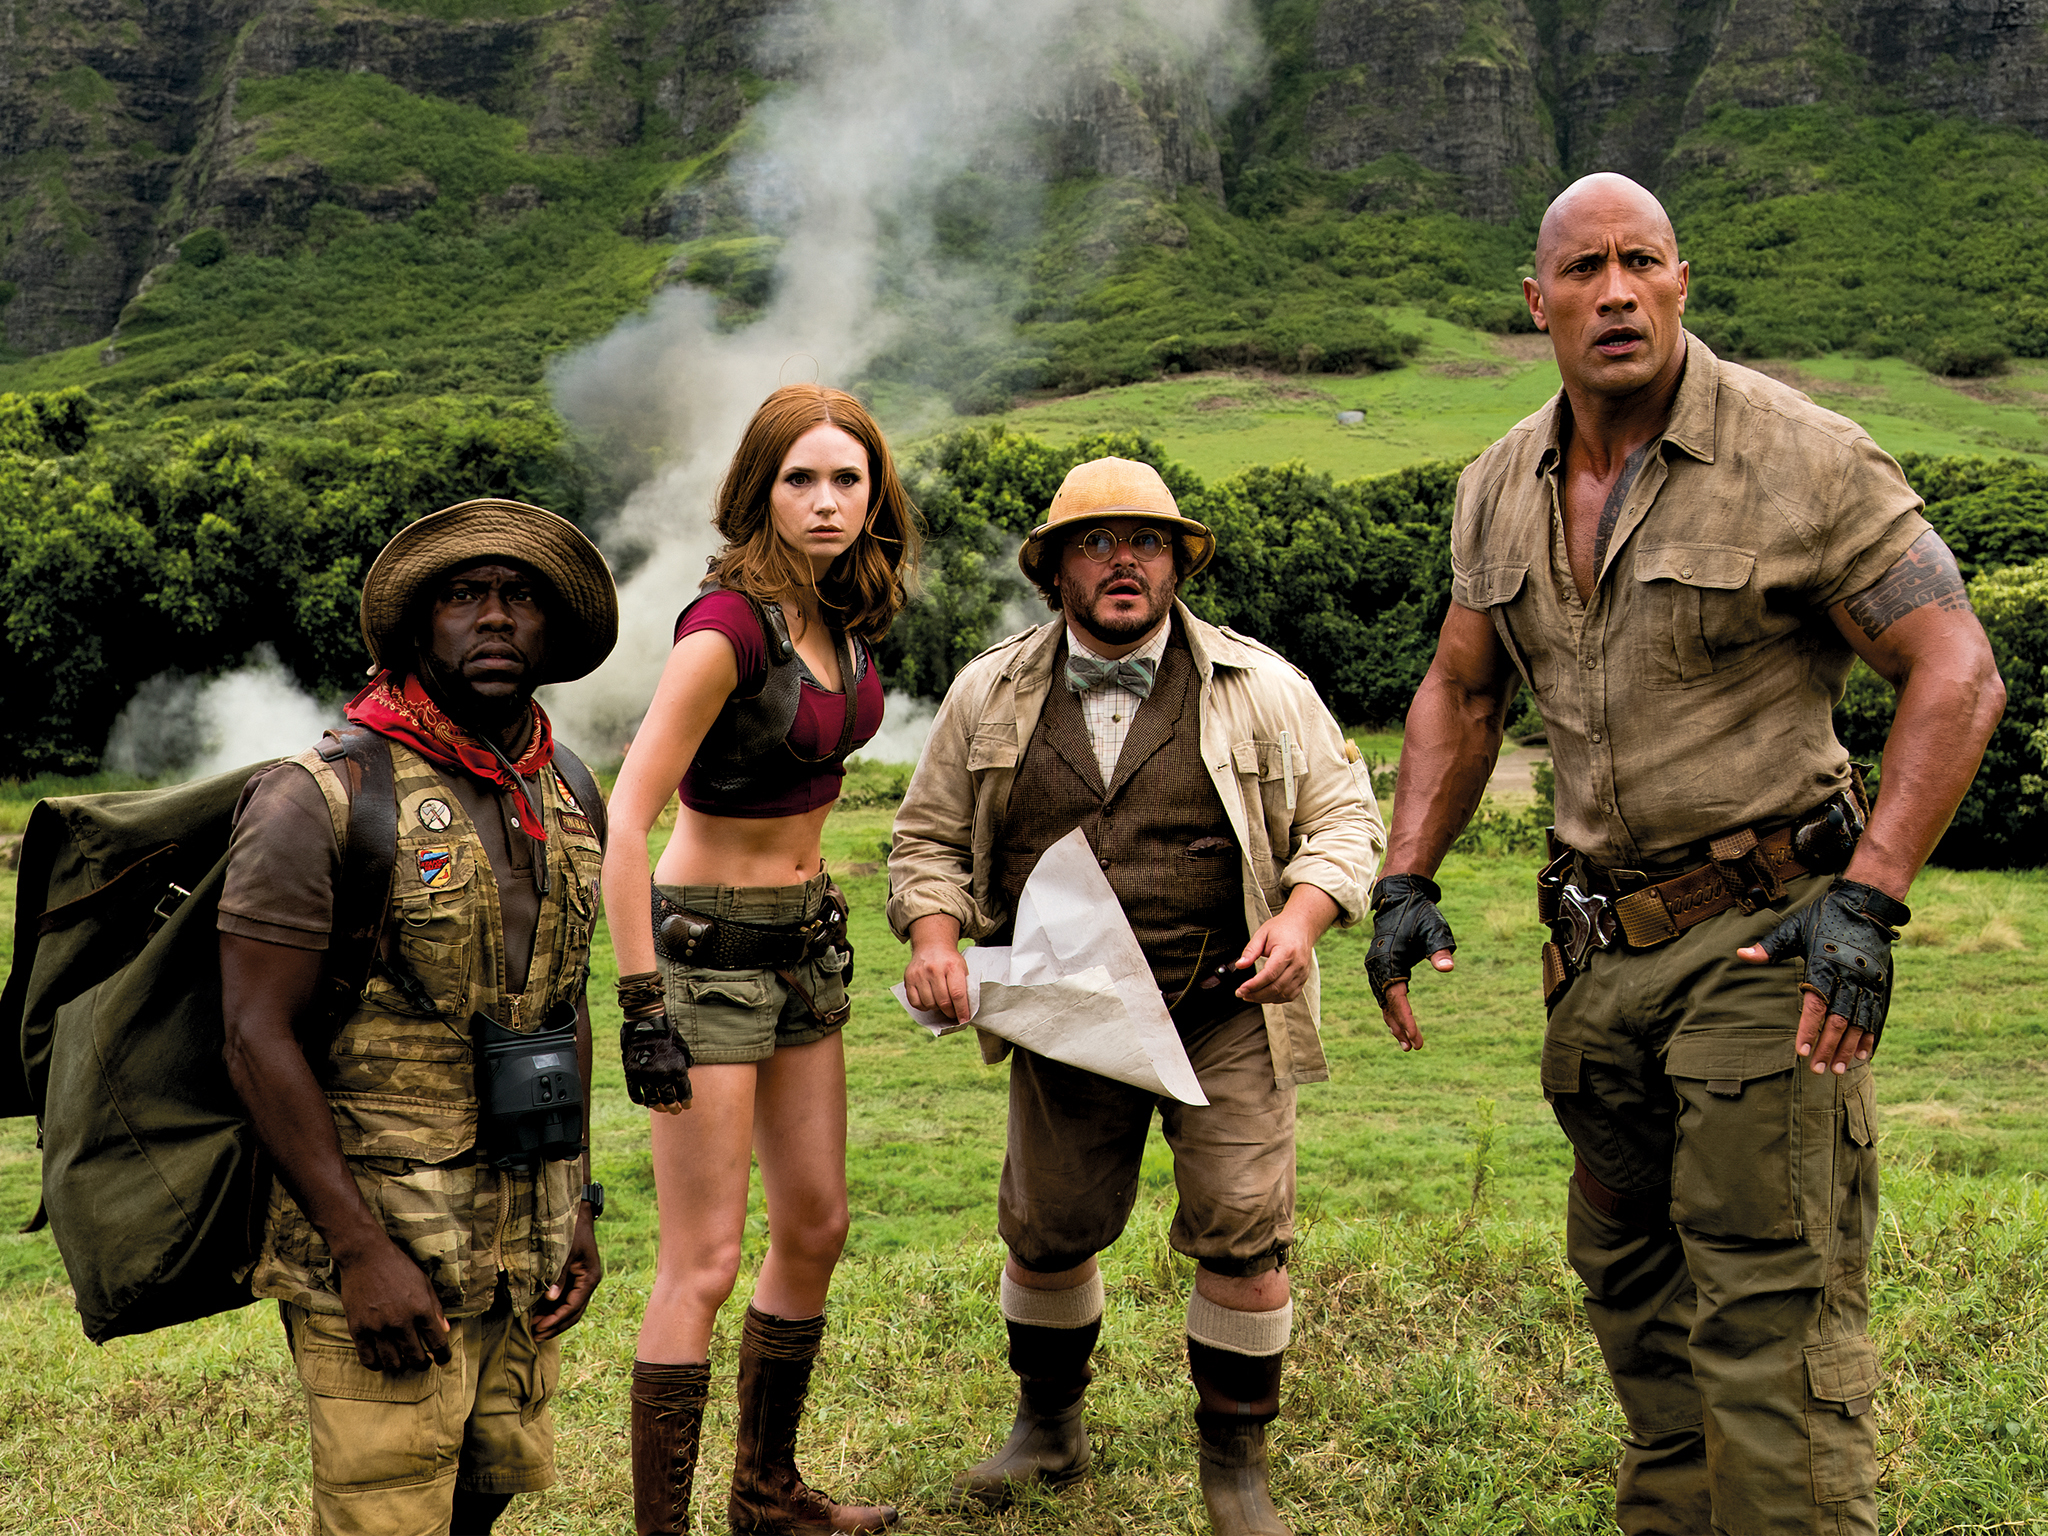 Jumanji: Welcome to the Jungle download the last version for ios